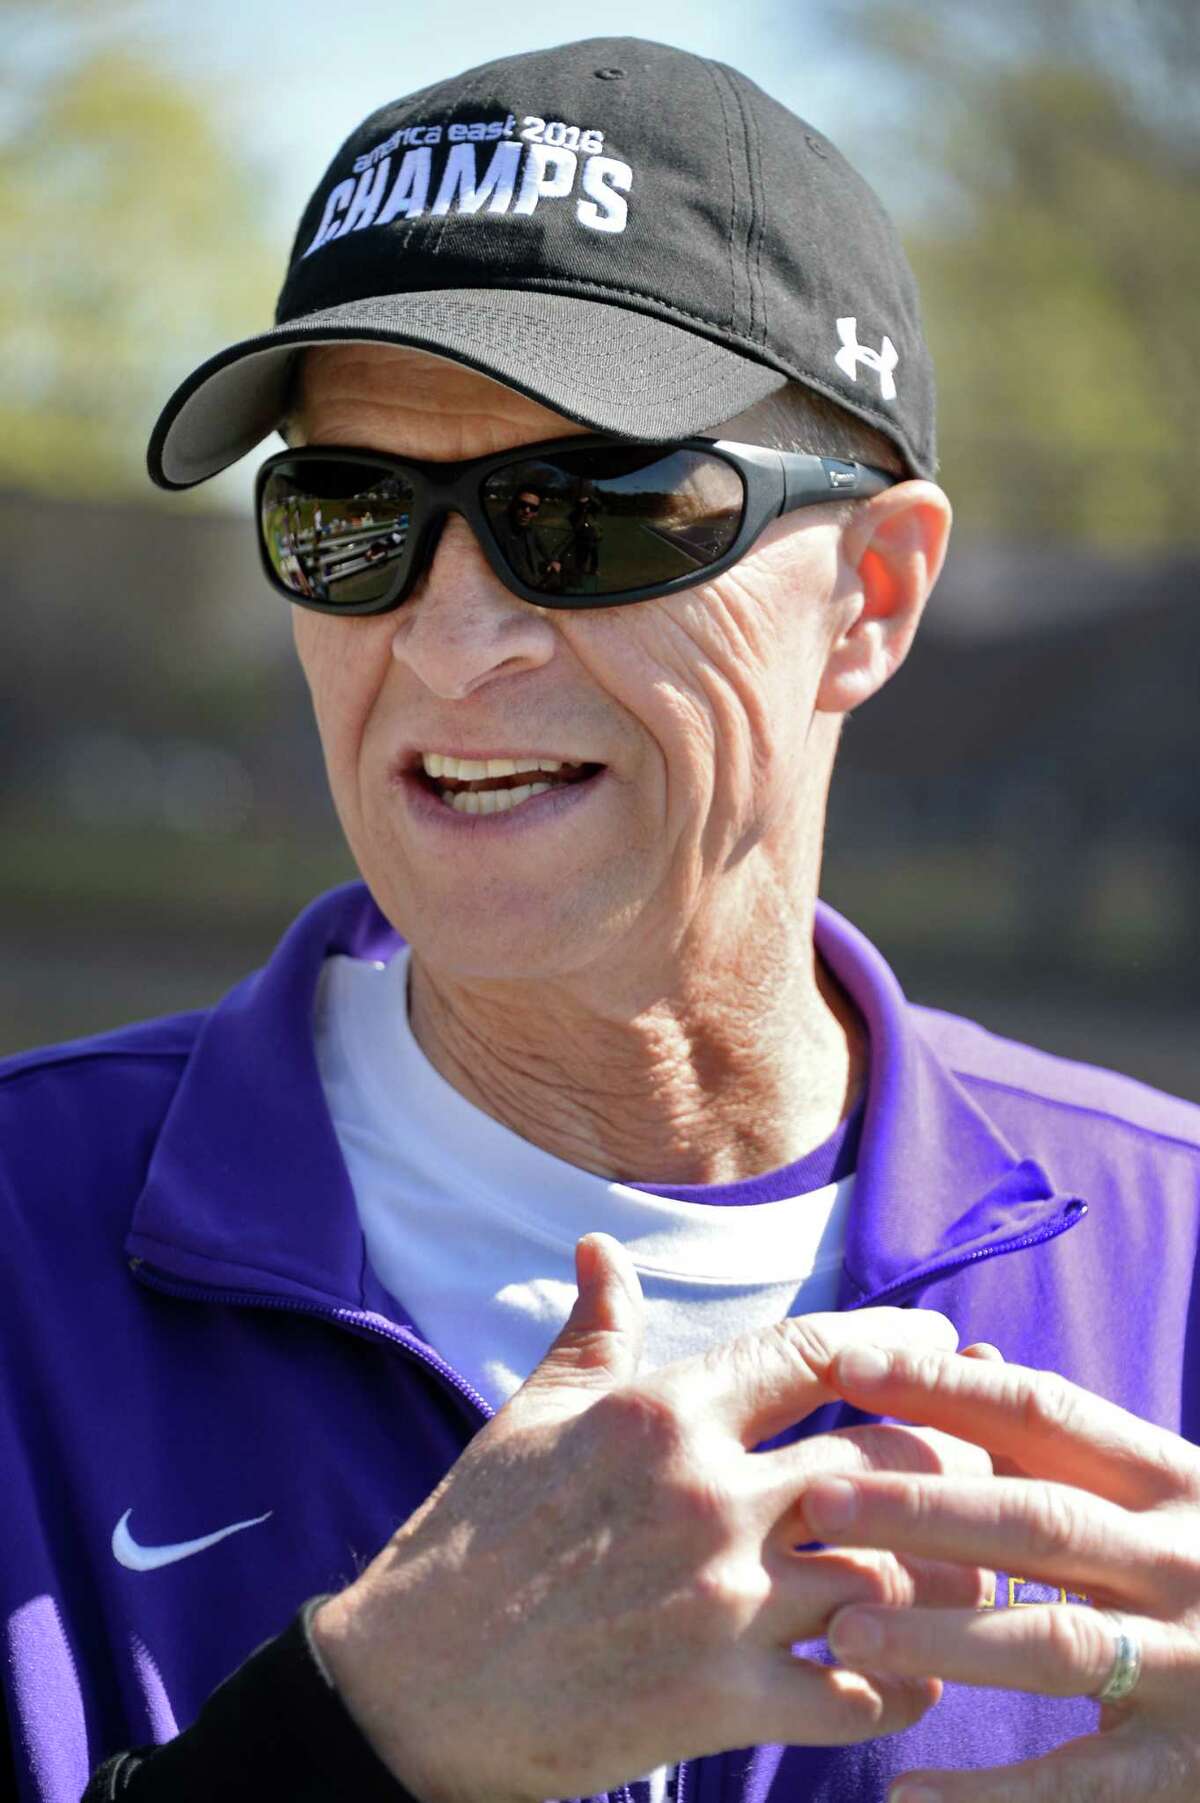 Coach Gordon Graham talks about the future of the University at Albany tennis team during their "fan appreciation" celebration after qualifying for the NCAA Tournament Saturday April 30, 2016 in Albany, NY. (John Carl D'Annibale / Times Union)